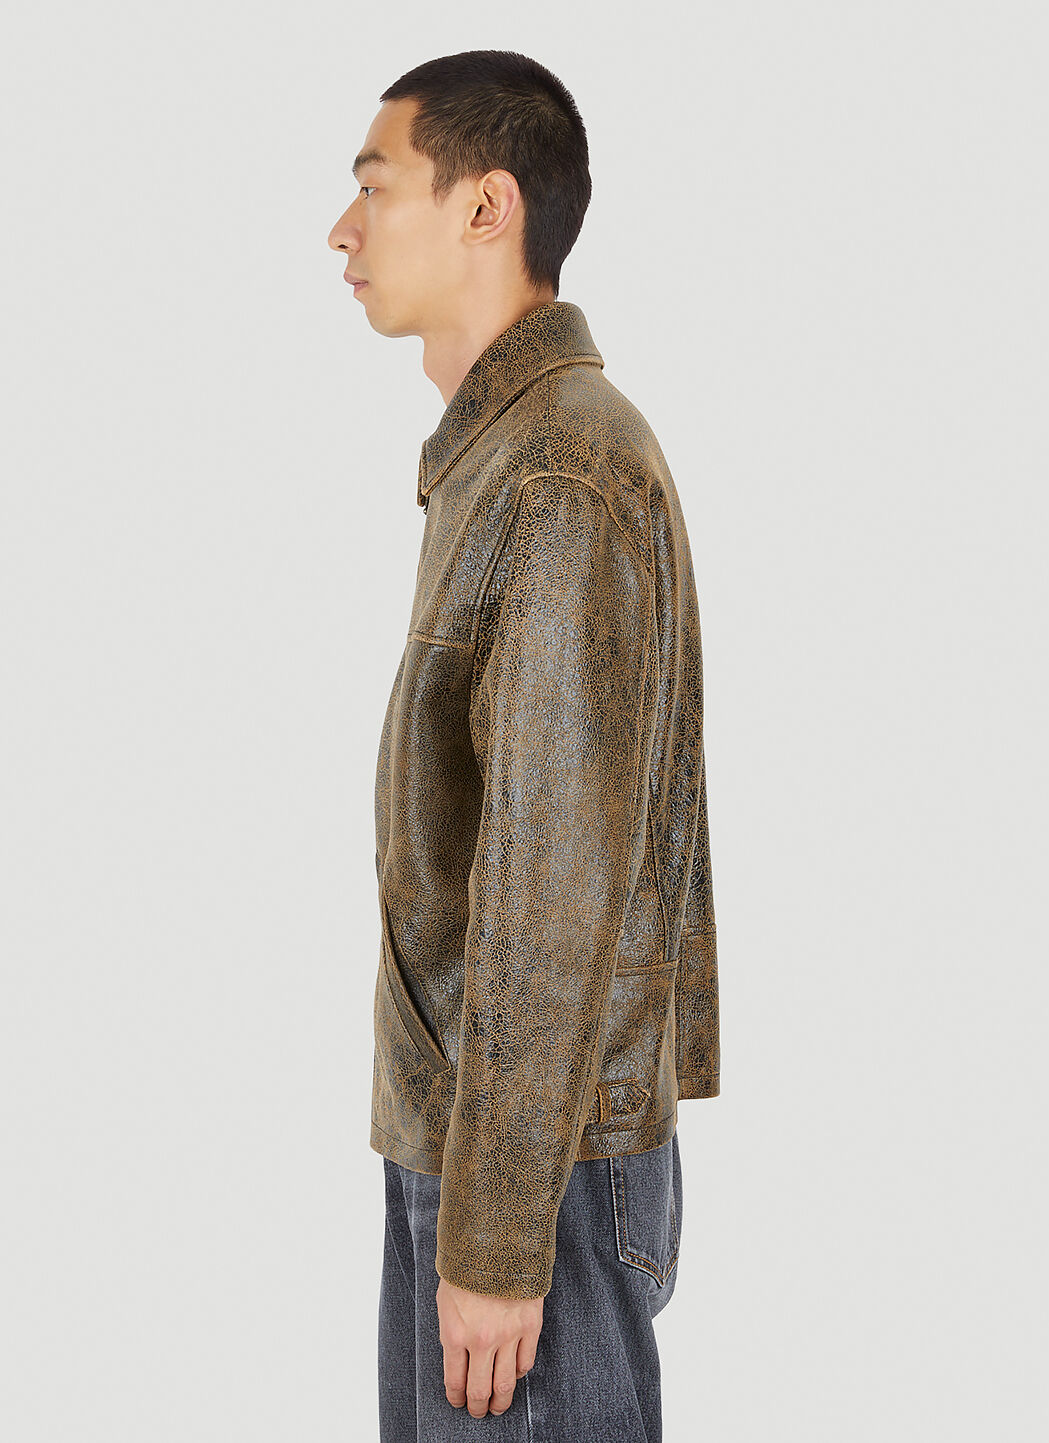 Guess USA Cracked Leather Jacket in Brown | LN-CC®